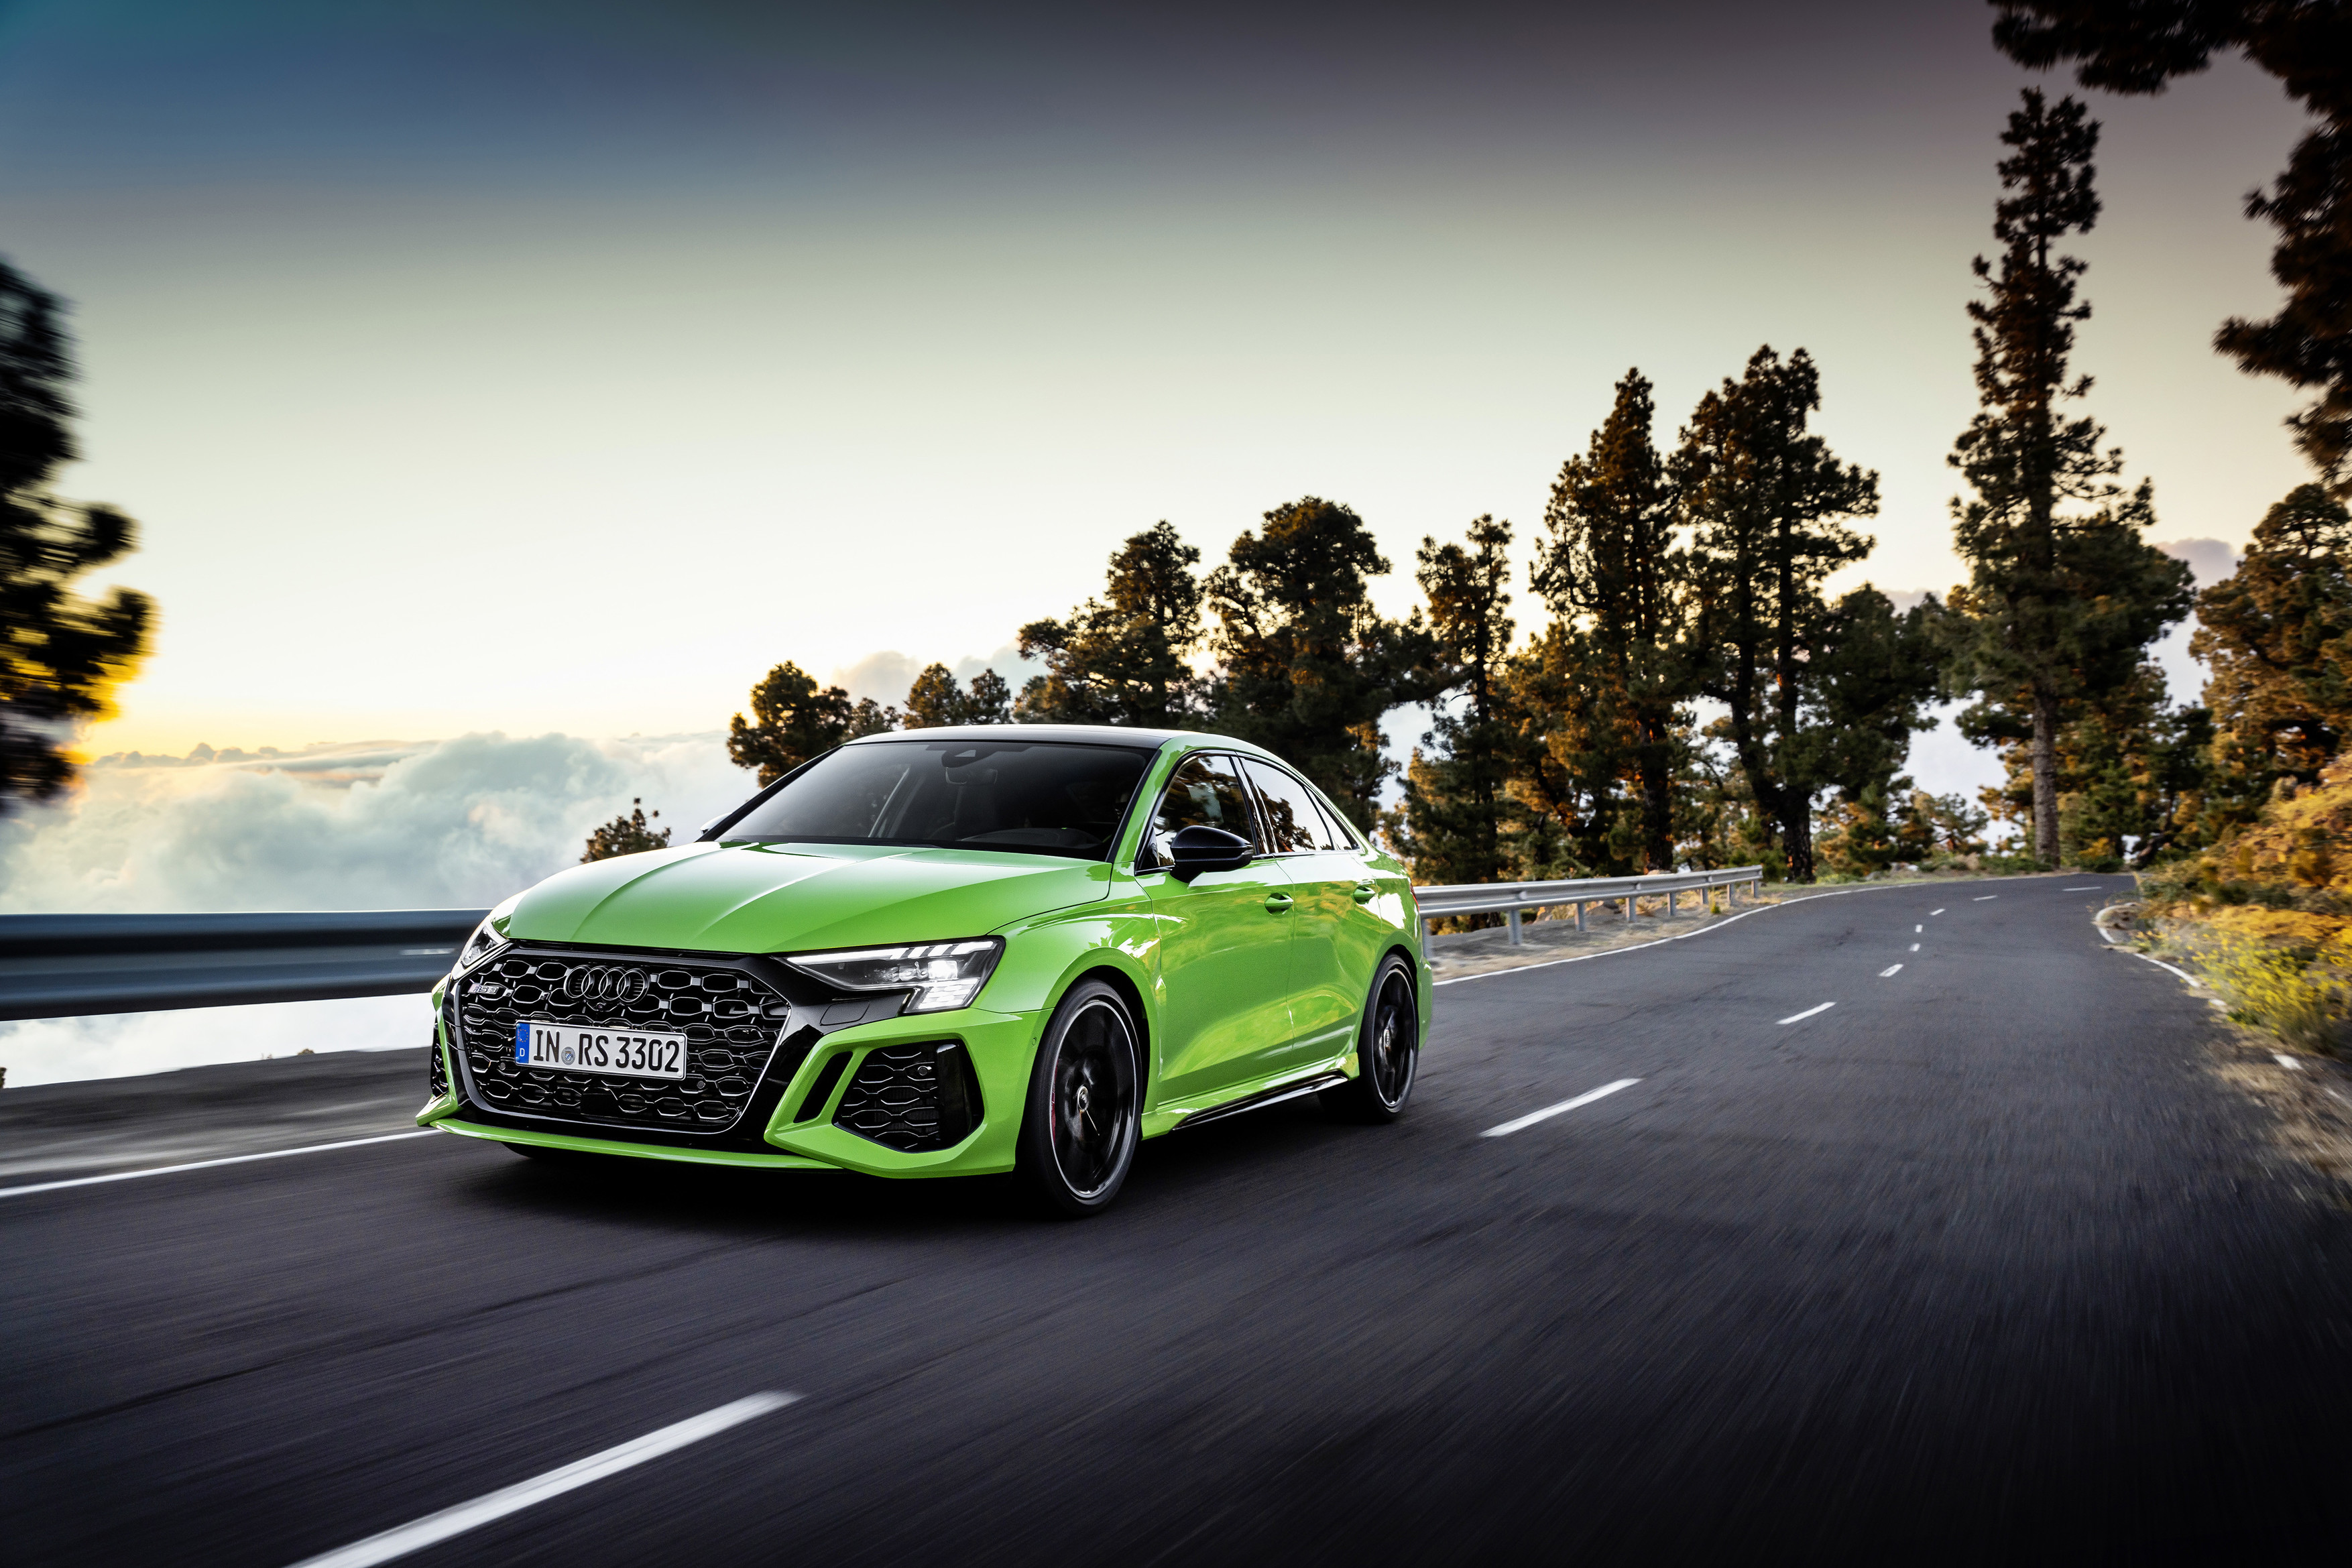 New Audi RS3 hits the road with dramatic new look and 180mph top speed